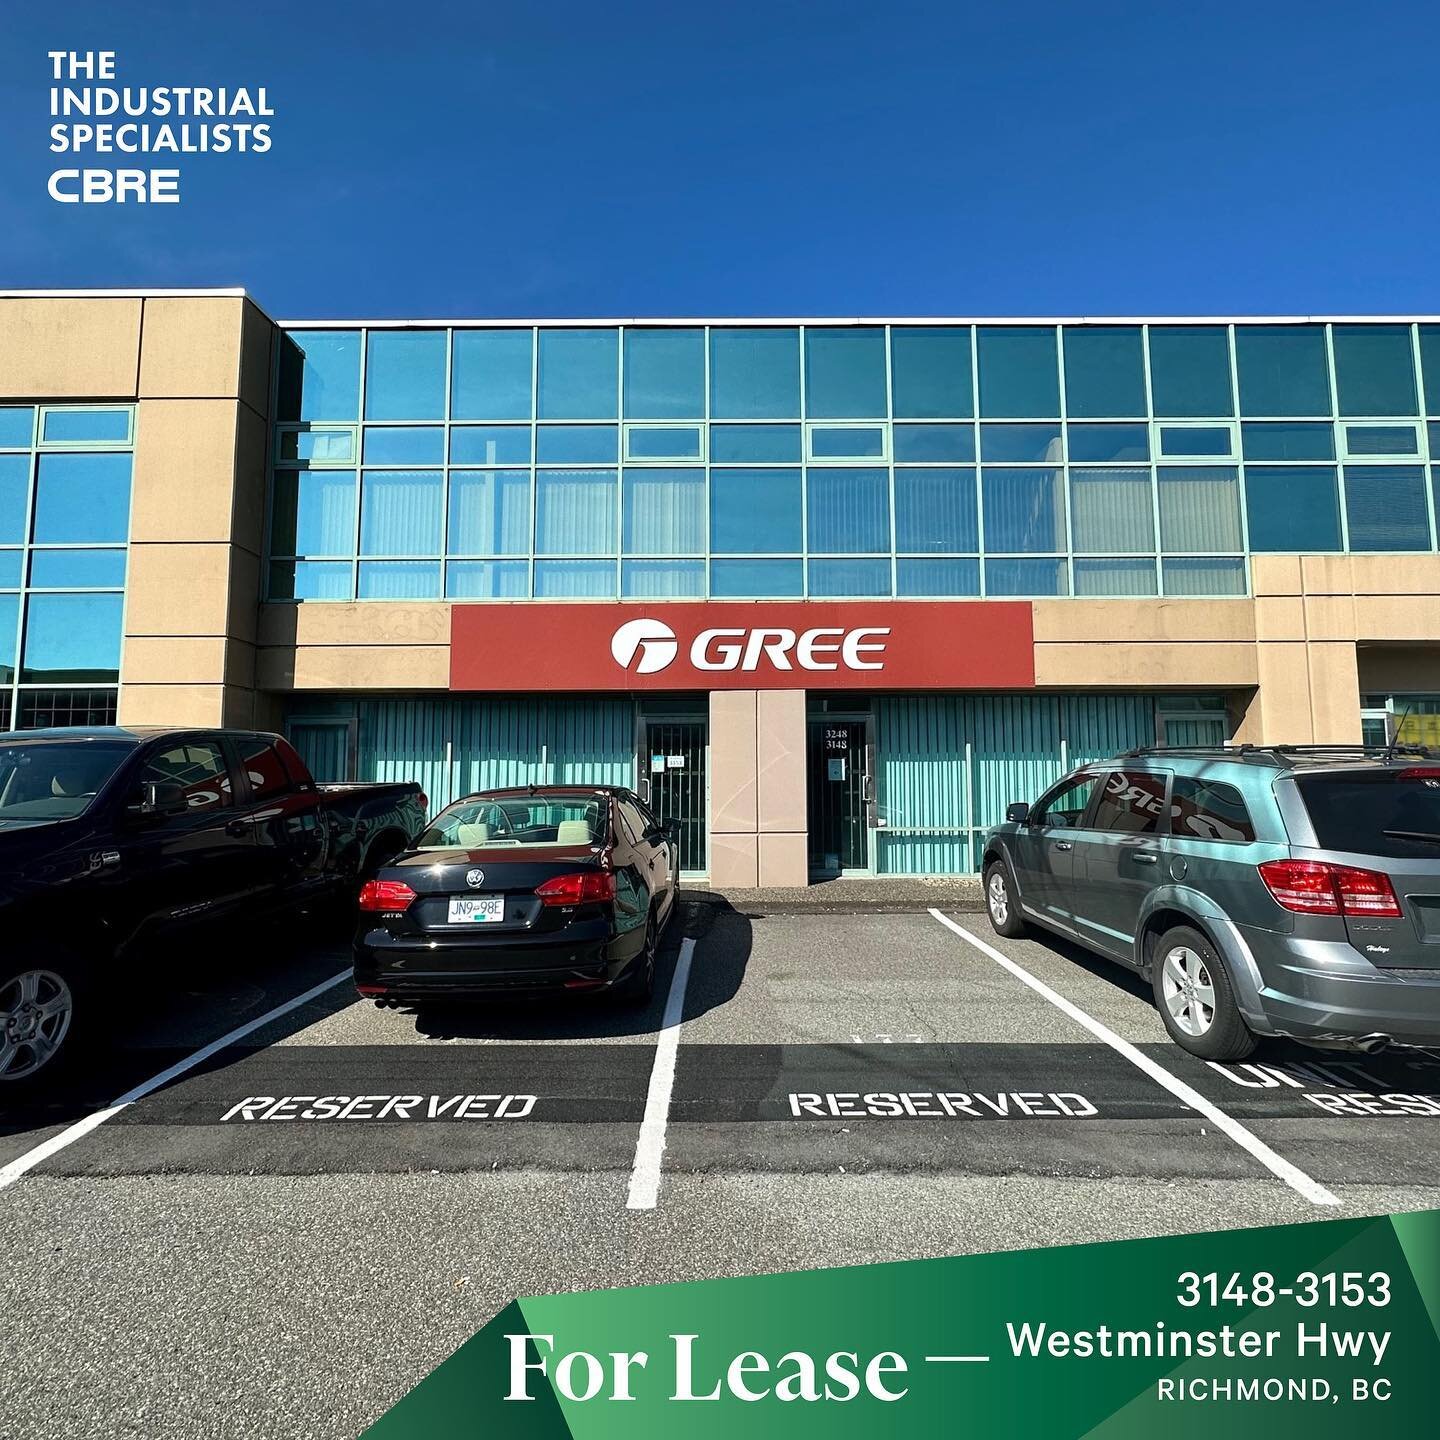 EAST RICHMOND | This small bay warehouse and office space spans over 5,056 SF which creates flexibility for a variety of businesses. The warehouse features two 10&rsquo; x 8 dock doors, 24&rsquo; clear ceiling height, reserved parking stalls, abundan